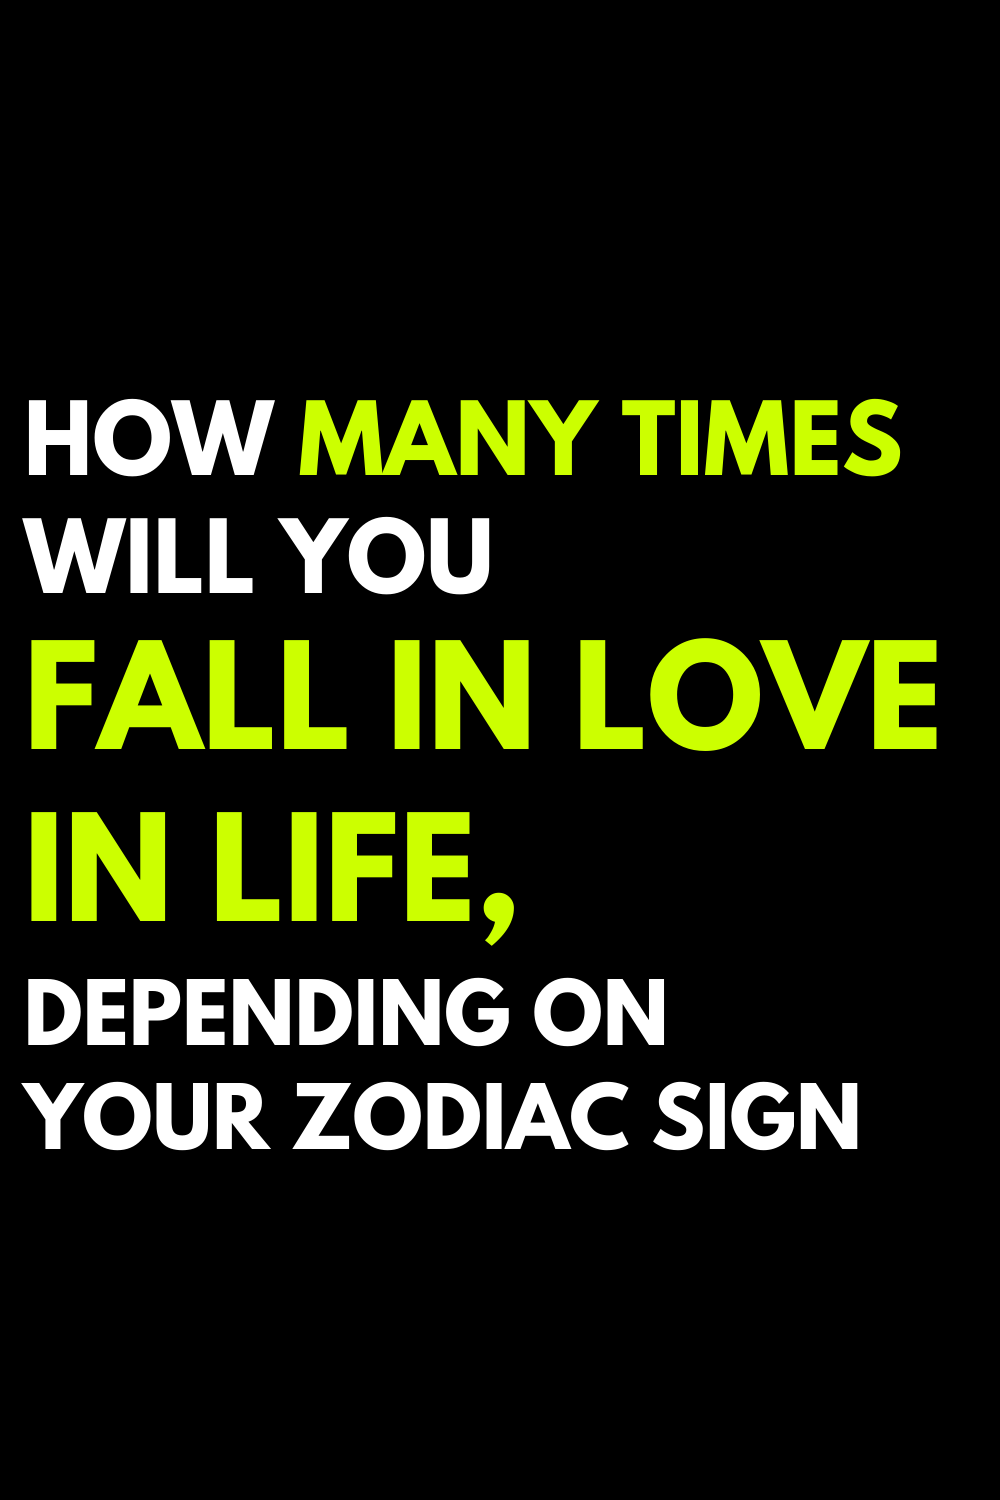 How many times will you fall in love in life, depending on your zodiac sign